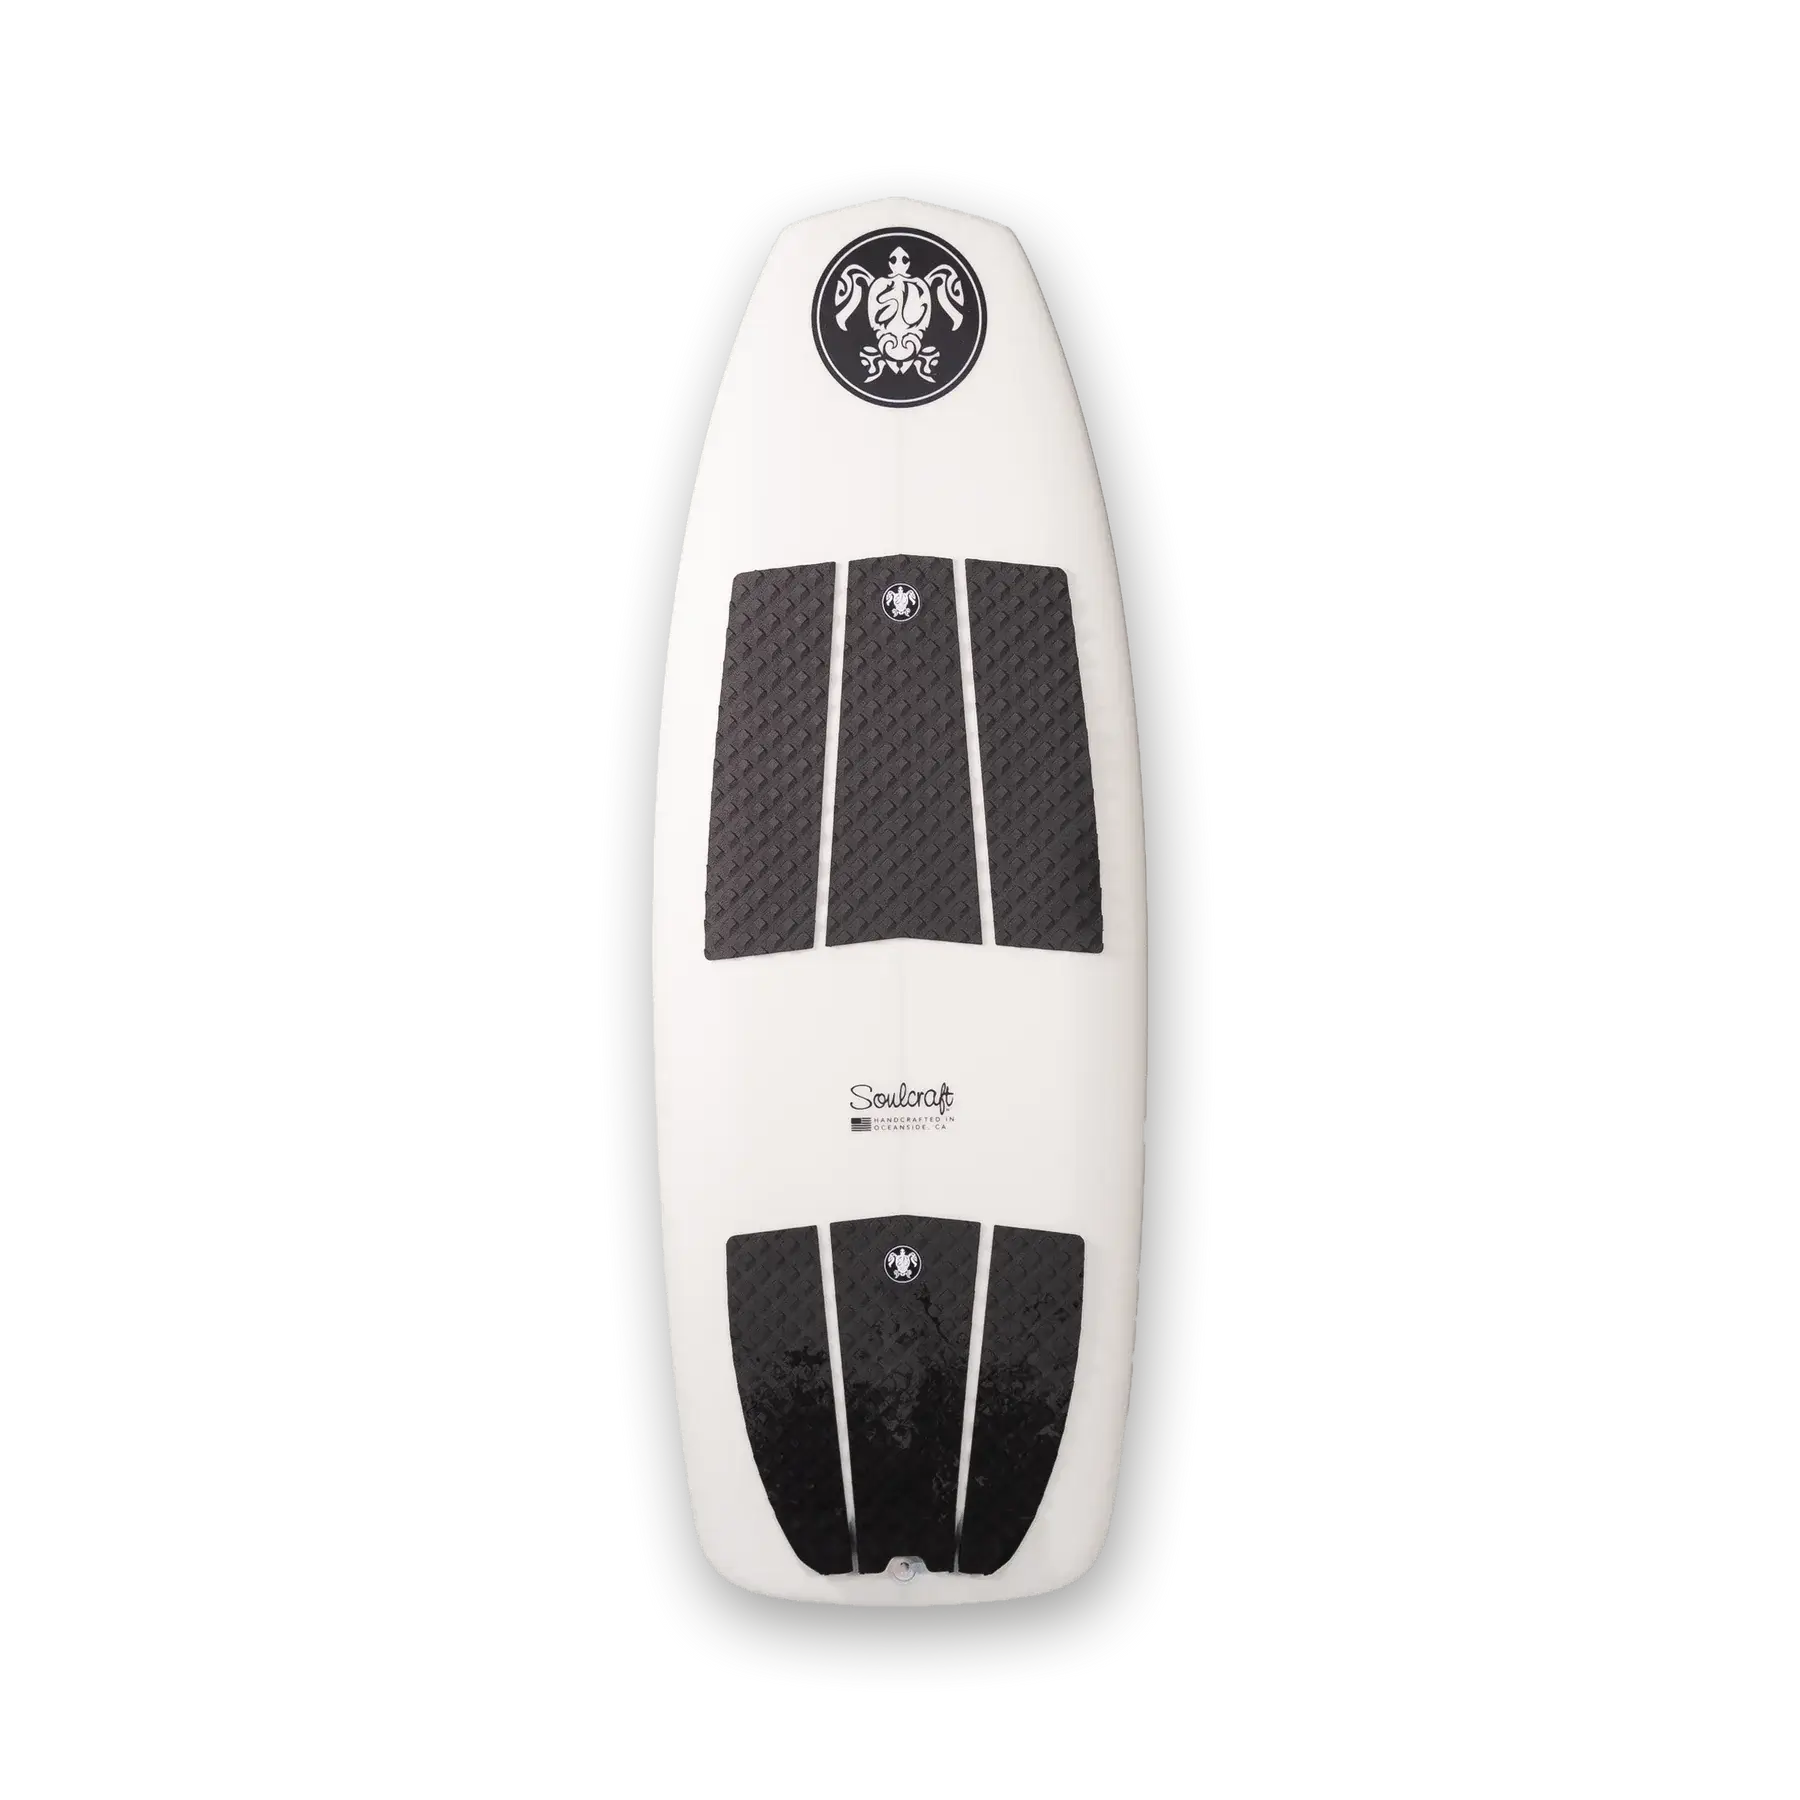 A fast board - the Soulcraft Voodoo Wakesurf Board by Soulcraft, featuring a stylish white and black design, set against a sleek black background.